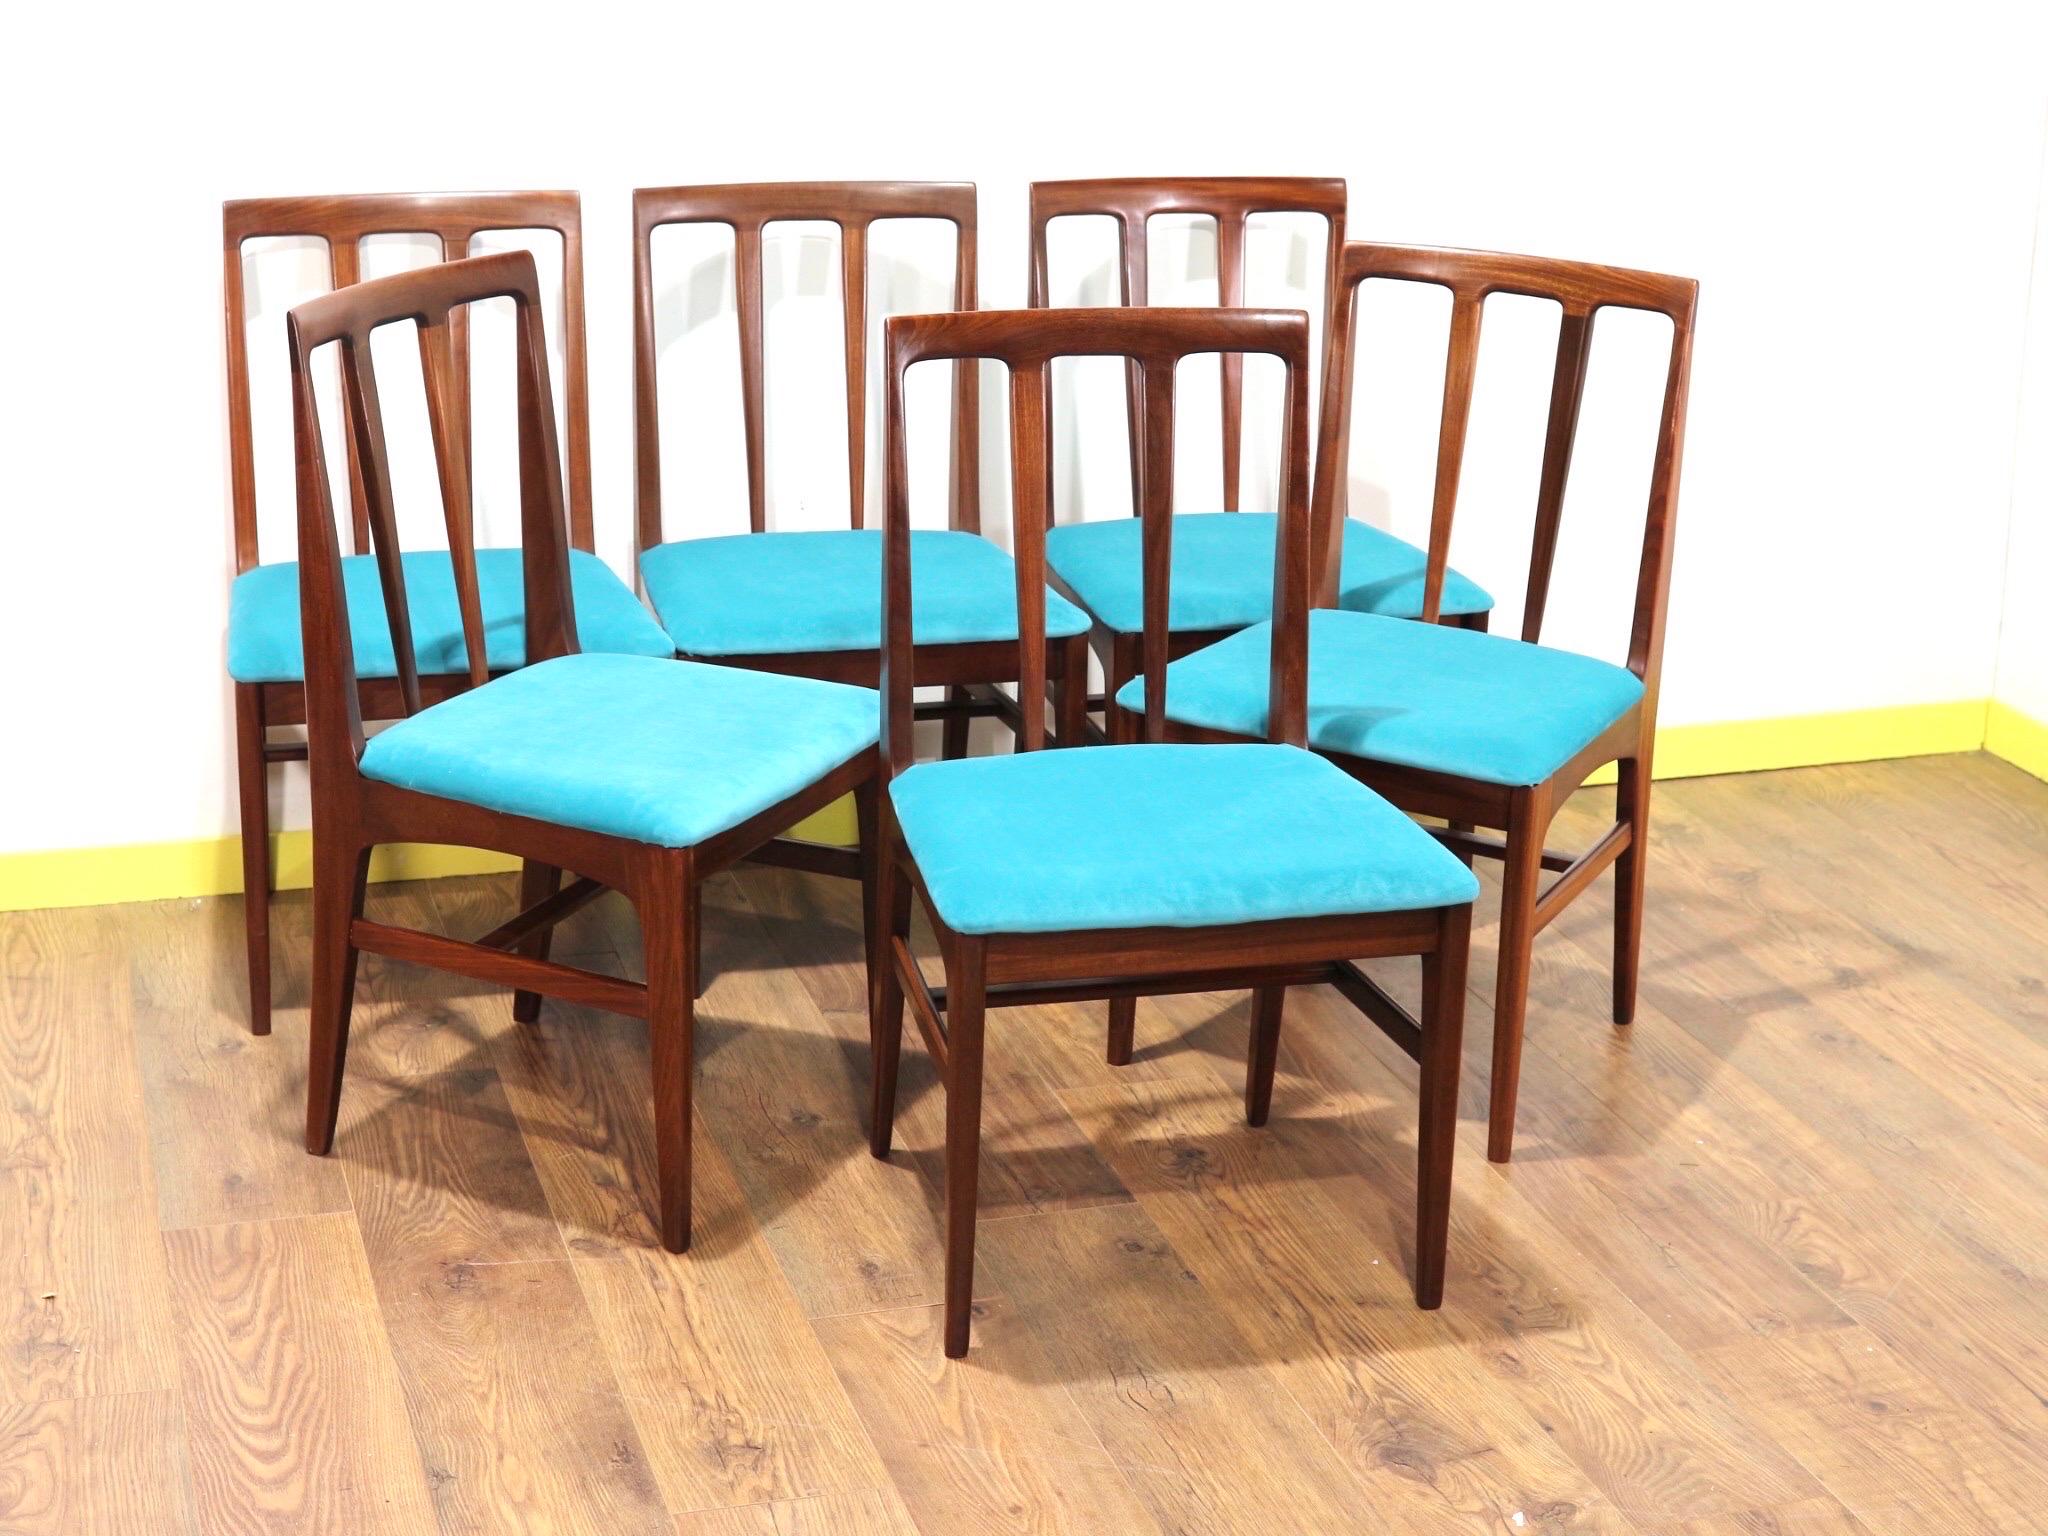 20th Century Mid-Century Modern Aromosia Danish Style Dining Chairs by Younger x 6